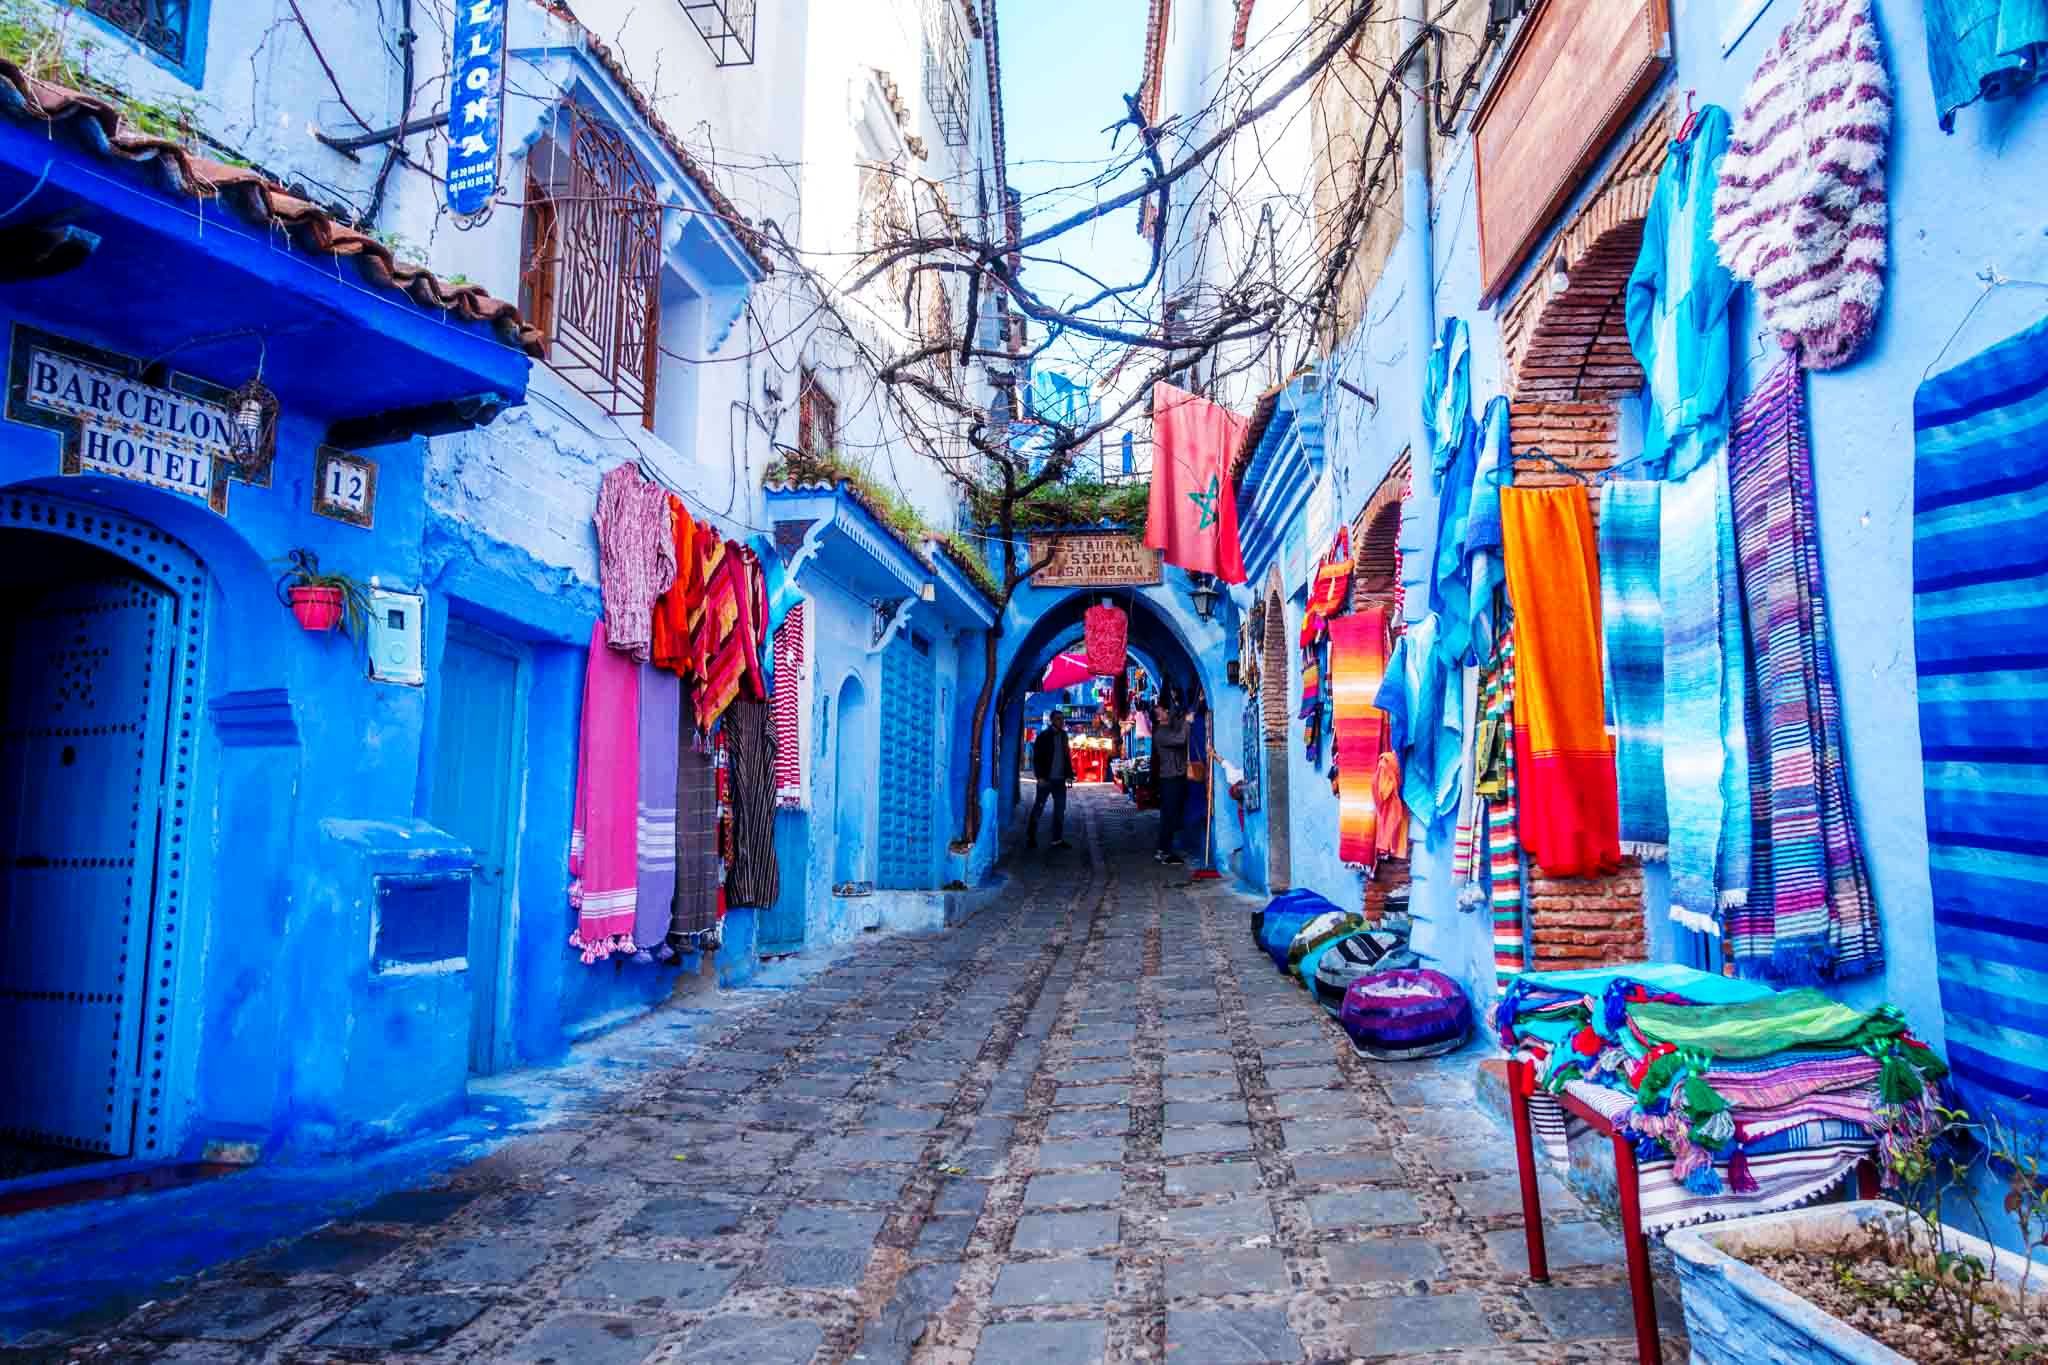 12 days Morocco New Year tour from Tangier to visit Morocco covering Chefchaouen, imperial cities and Sahara desert of Merzouga